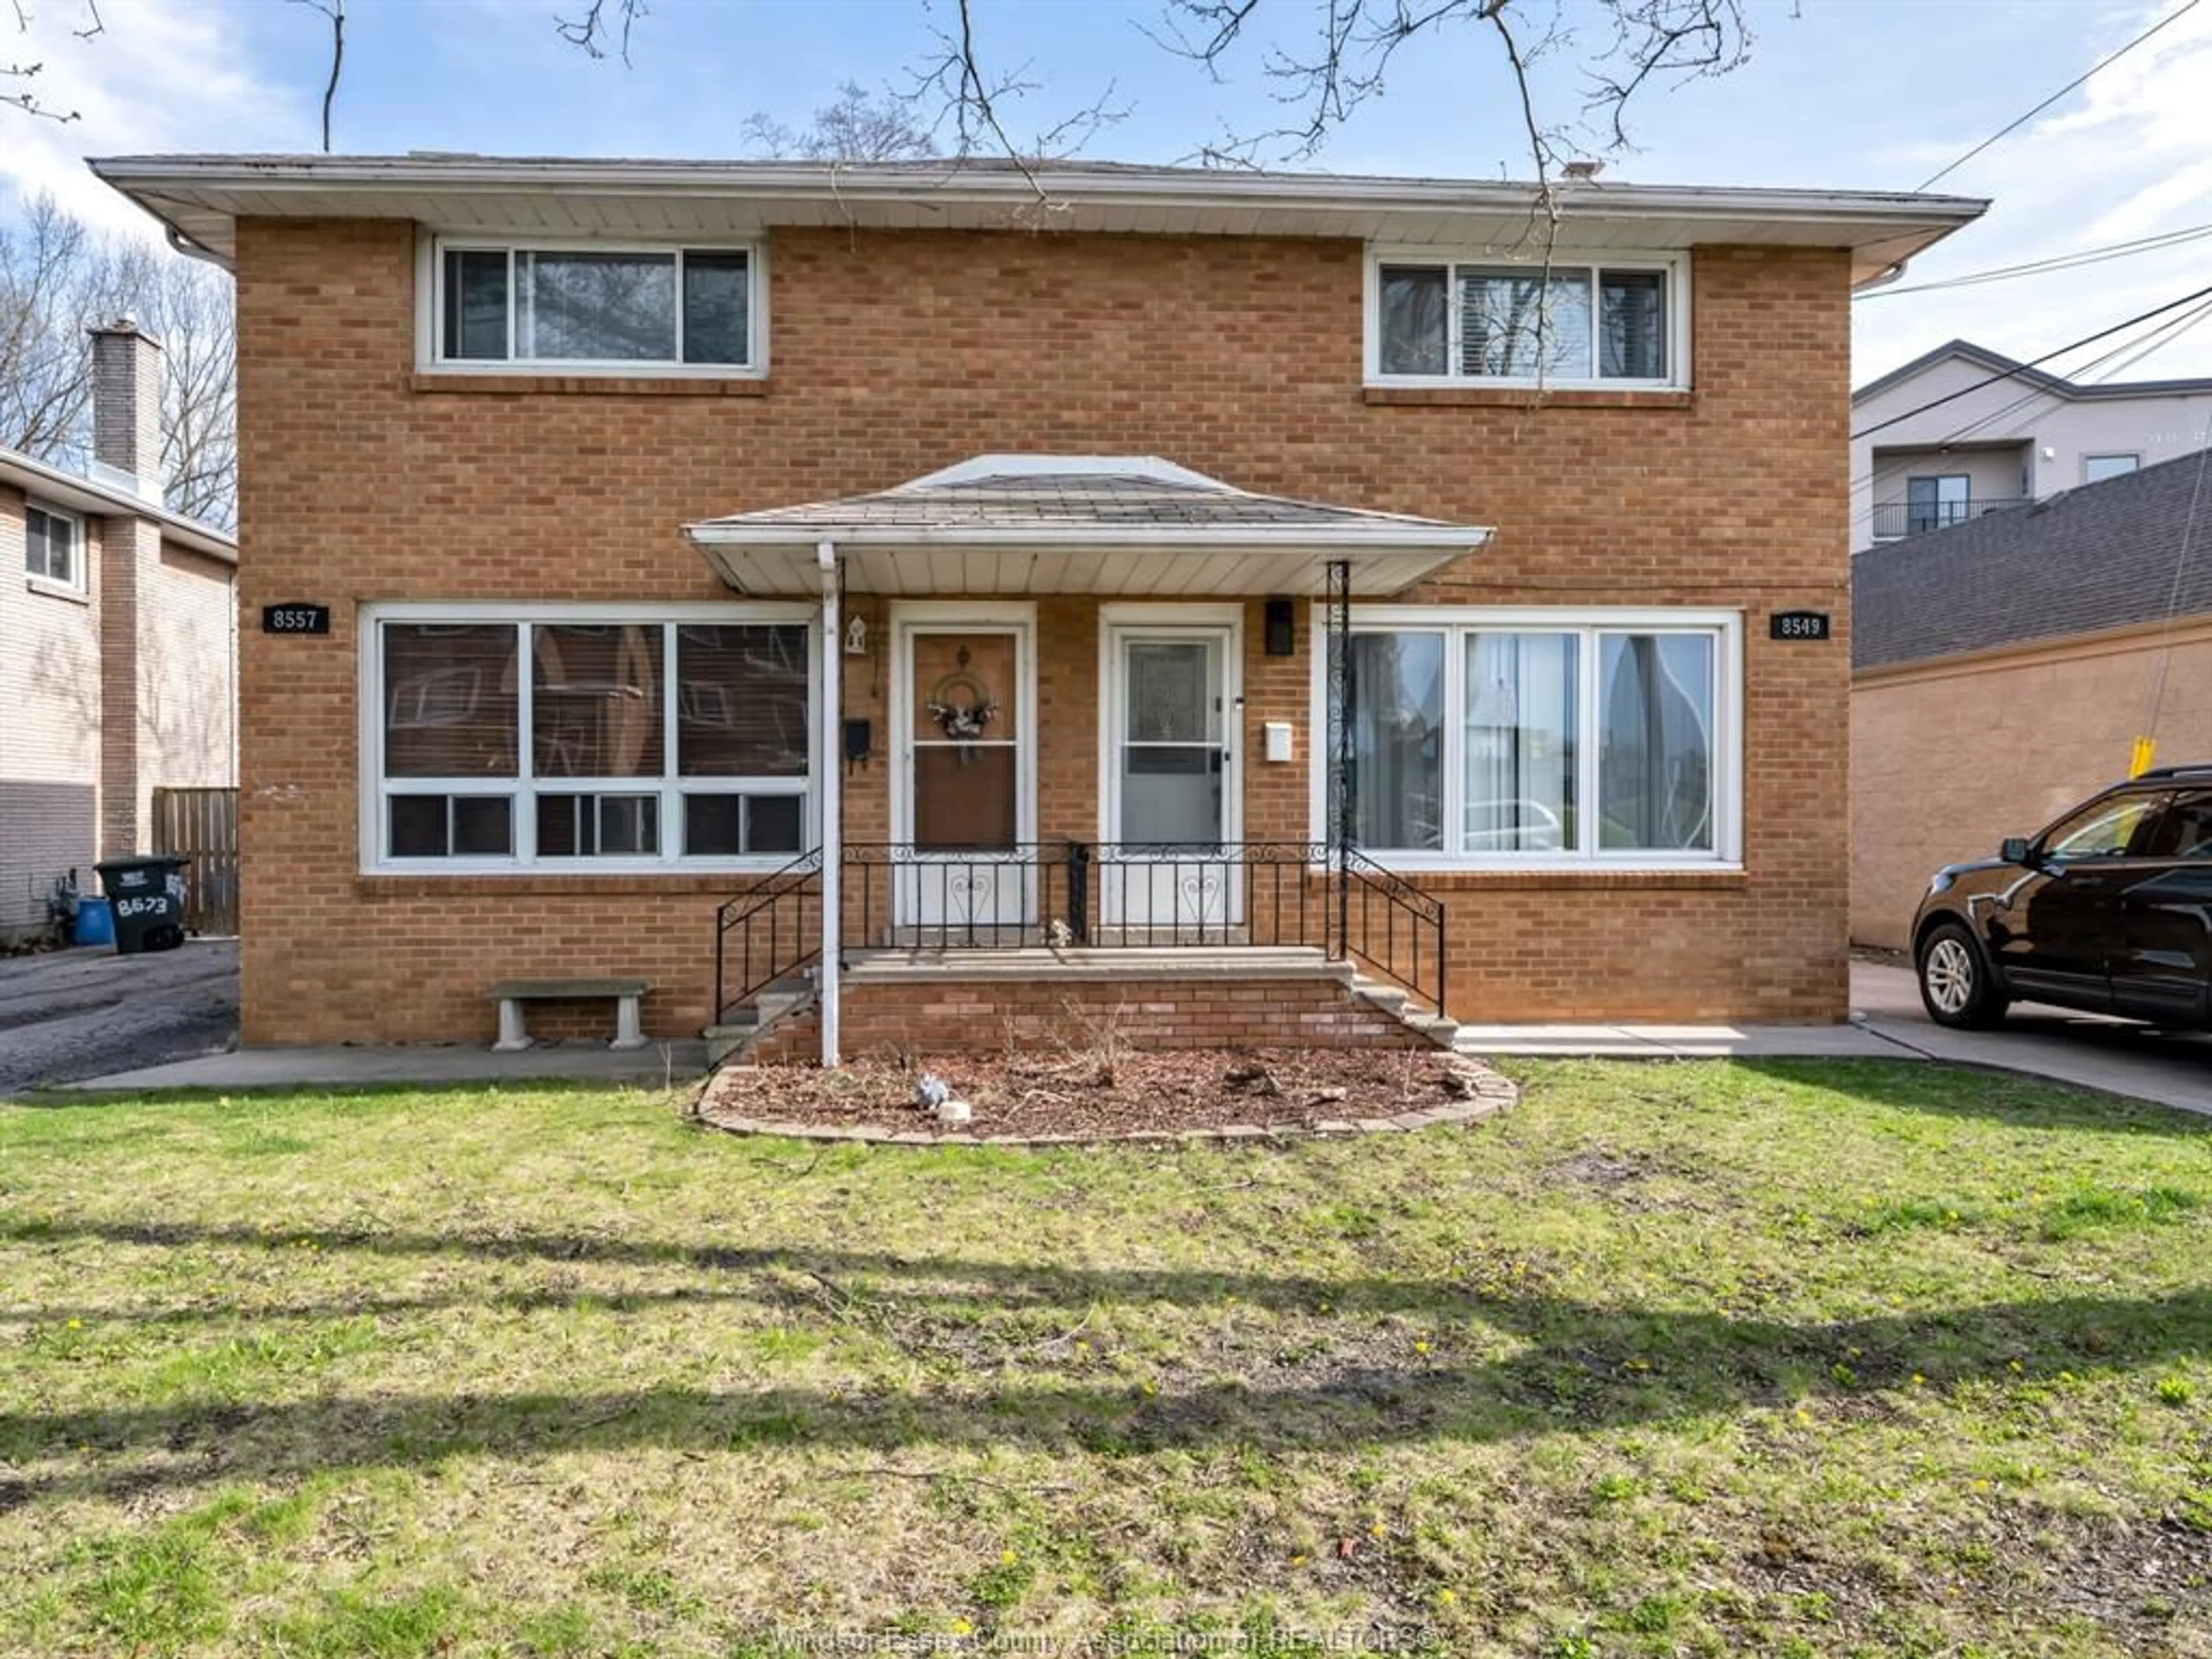 Home with brick exterior material for 8557 WYANDOTTE St, Windsor Ontario N8S 1T7